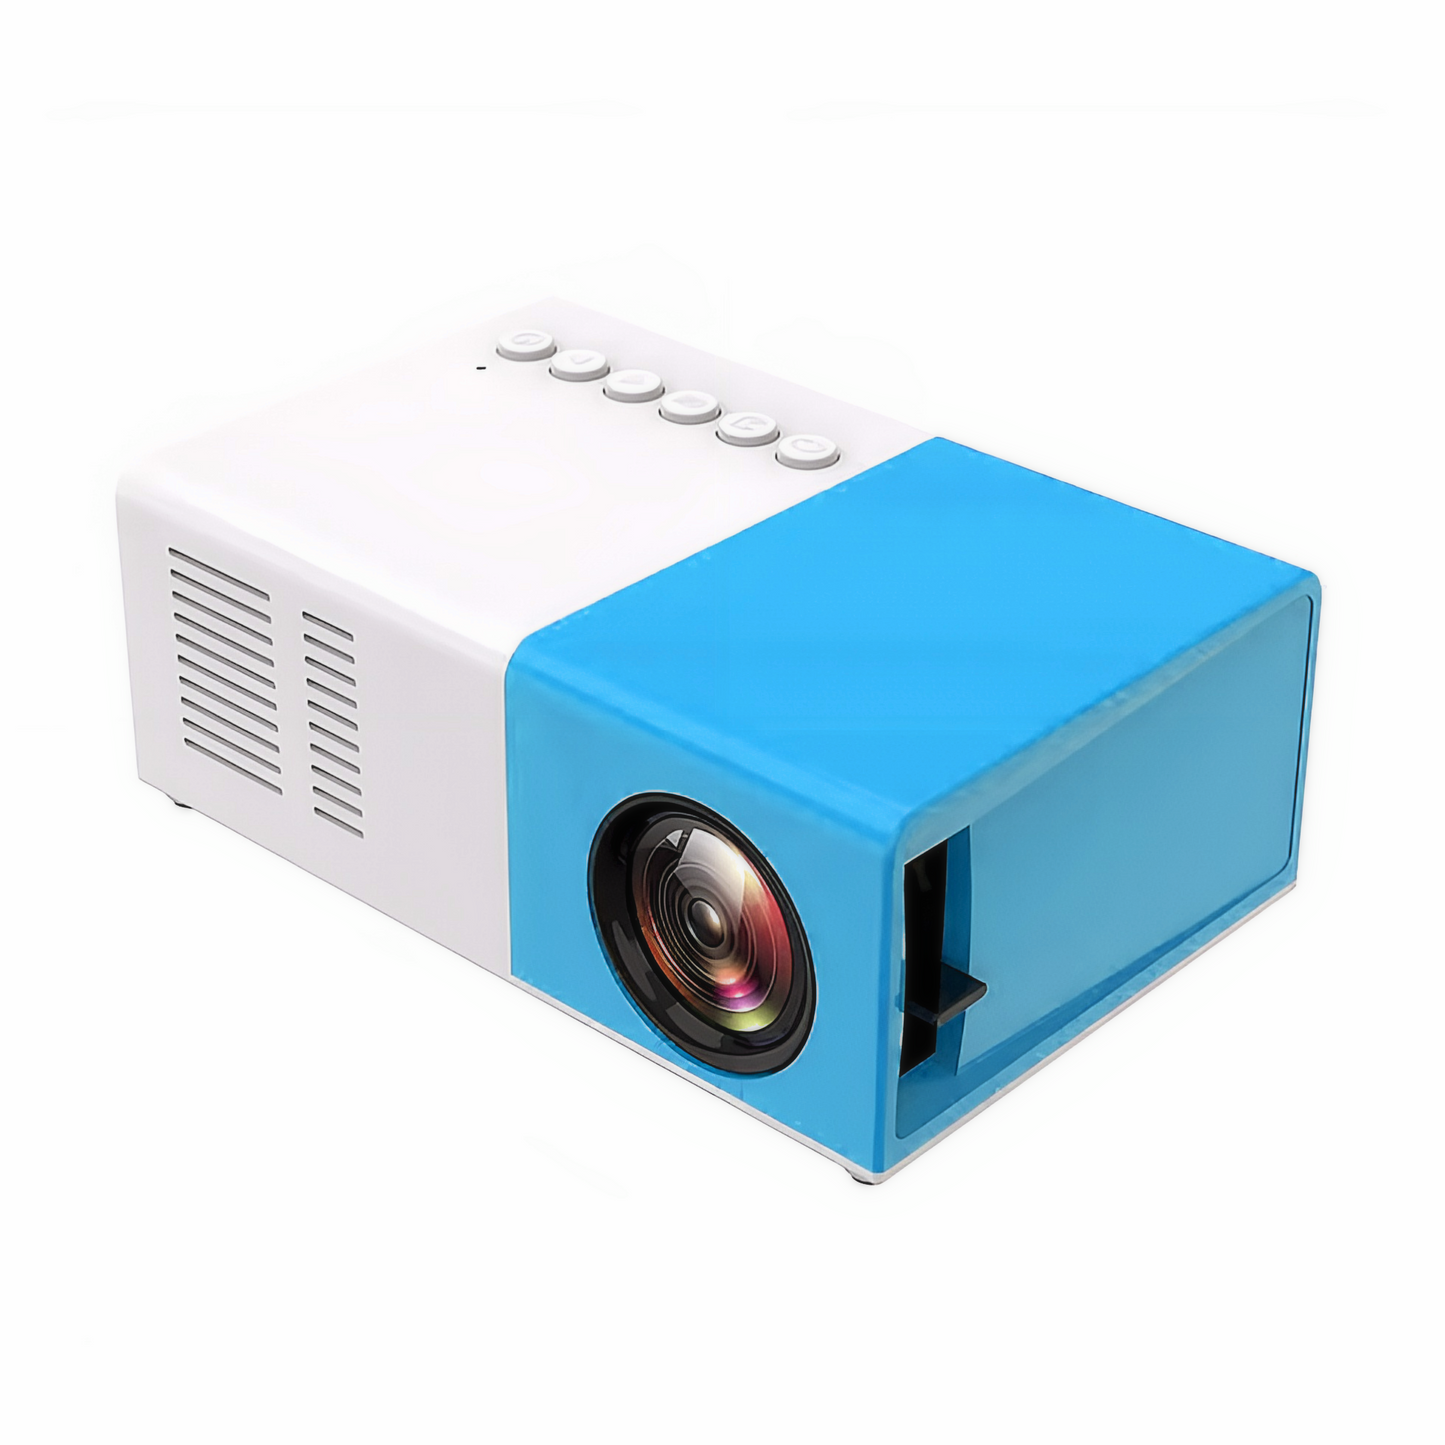 Slimme projector